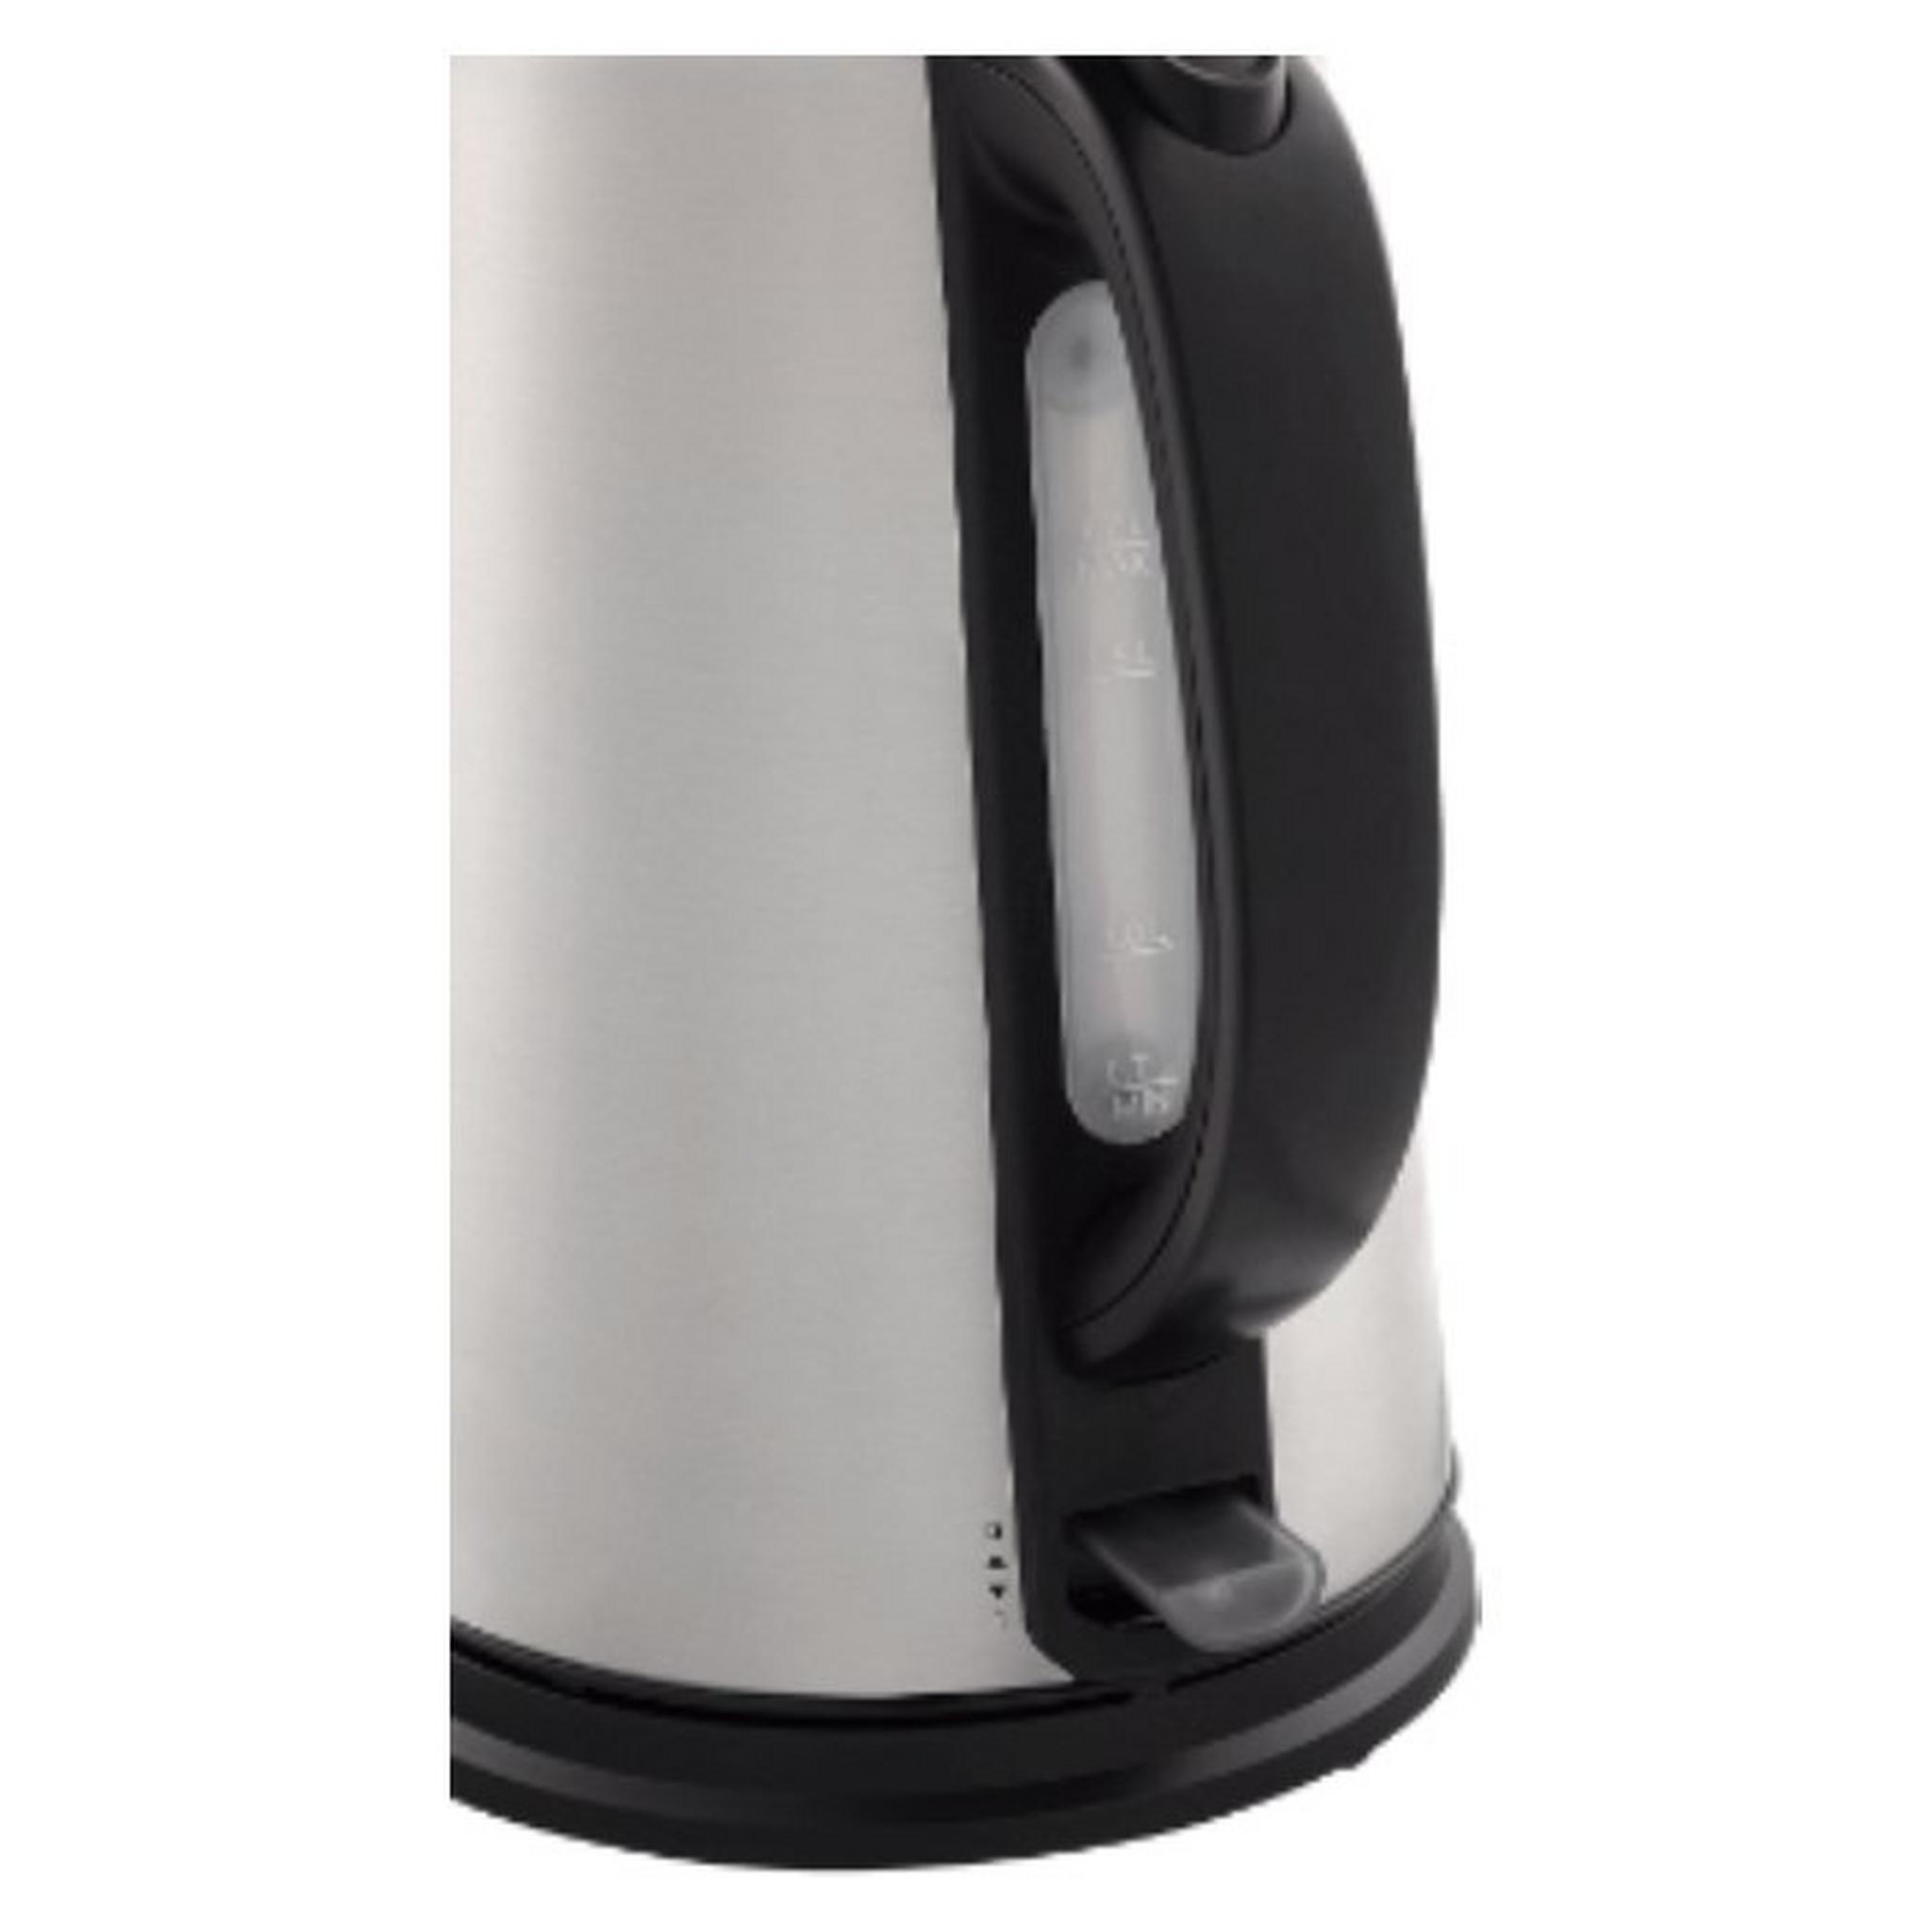 Beko Water Kettle, 1.7 L Capacity, 2200 Watts, WKM6226I - Stainless Steel